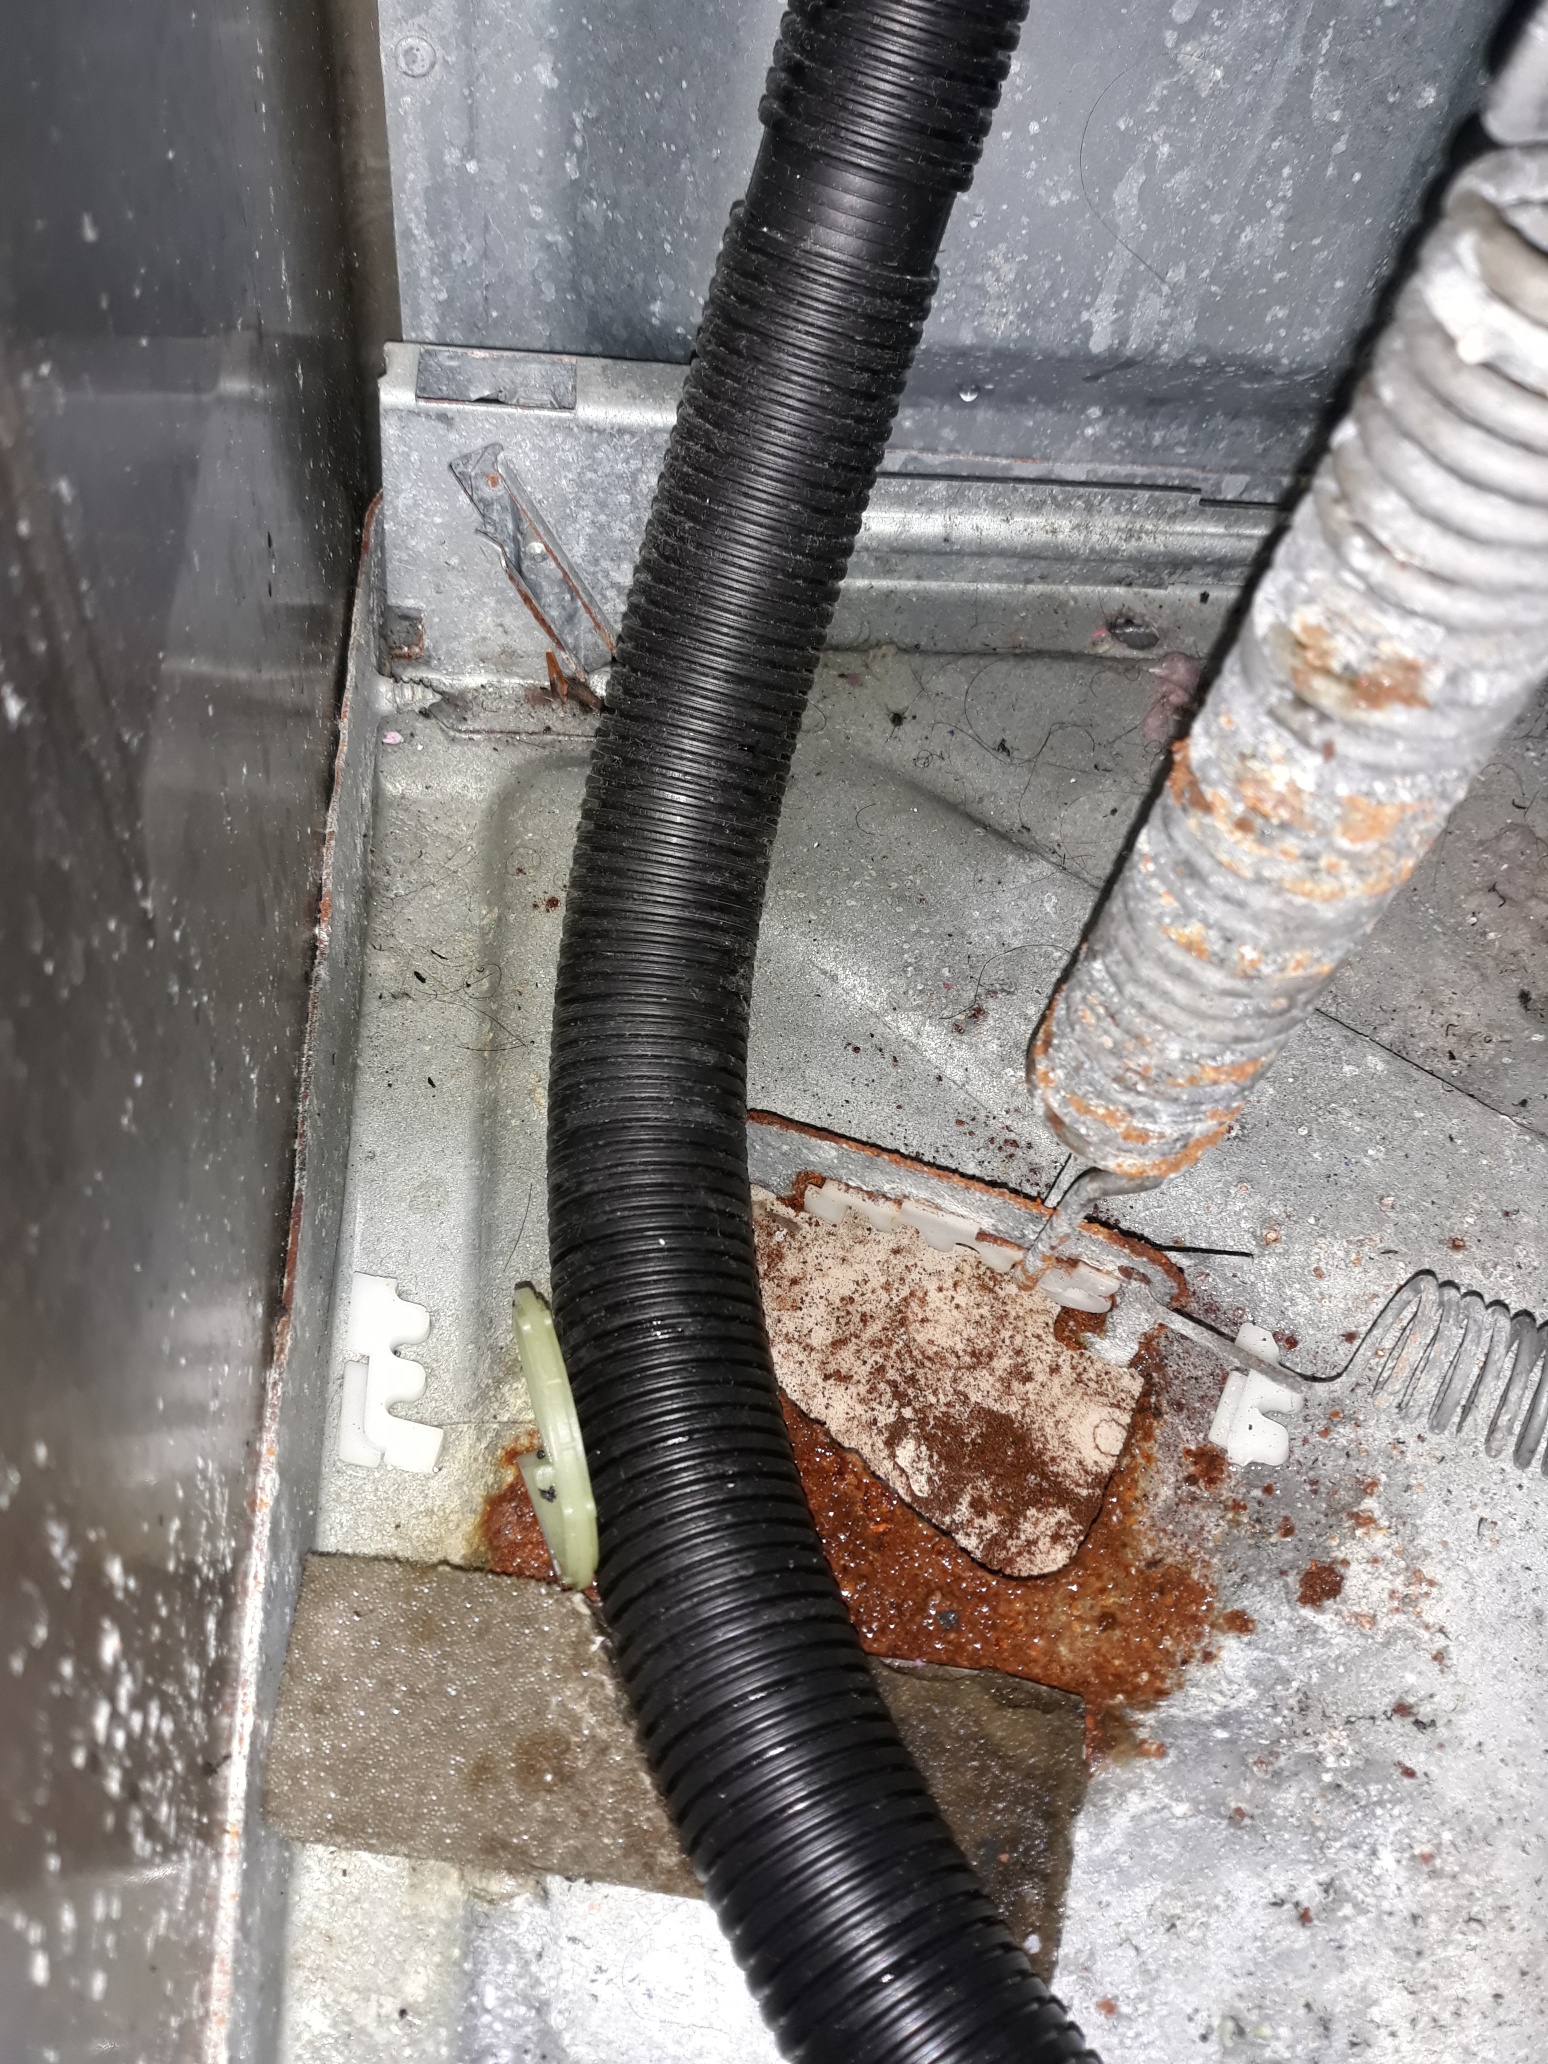 appliance repair dryer repair repair require a replacement drain hose that has friction damage se 134th ave rd weirsdale fl 32195